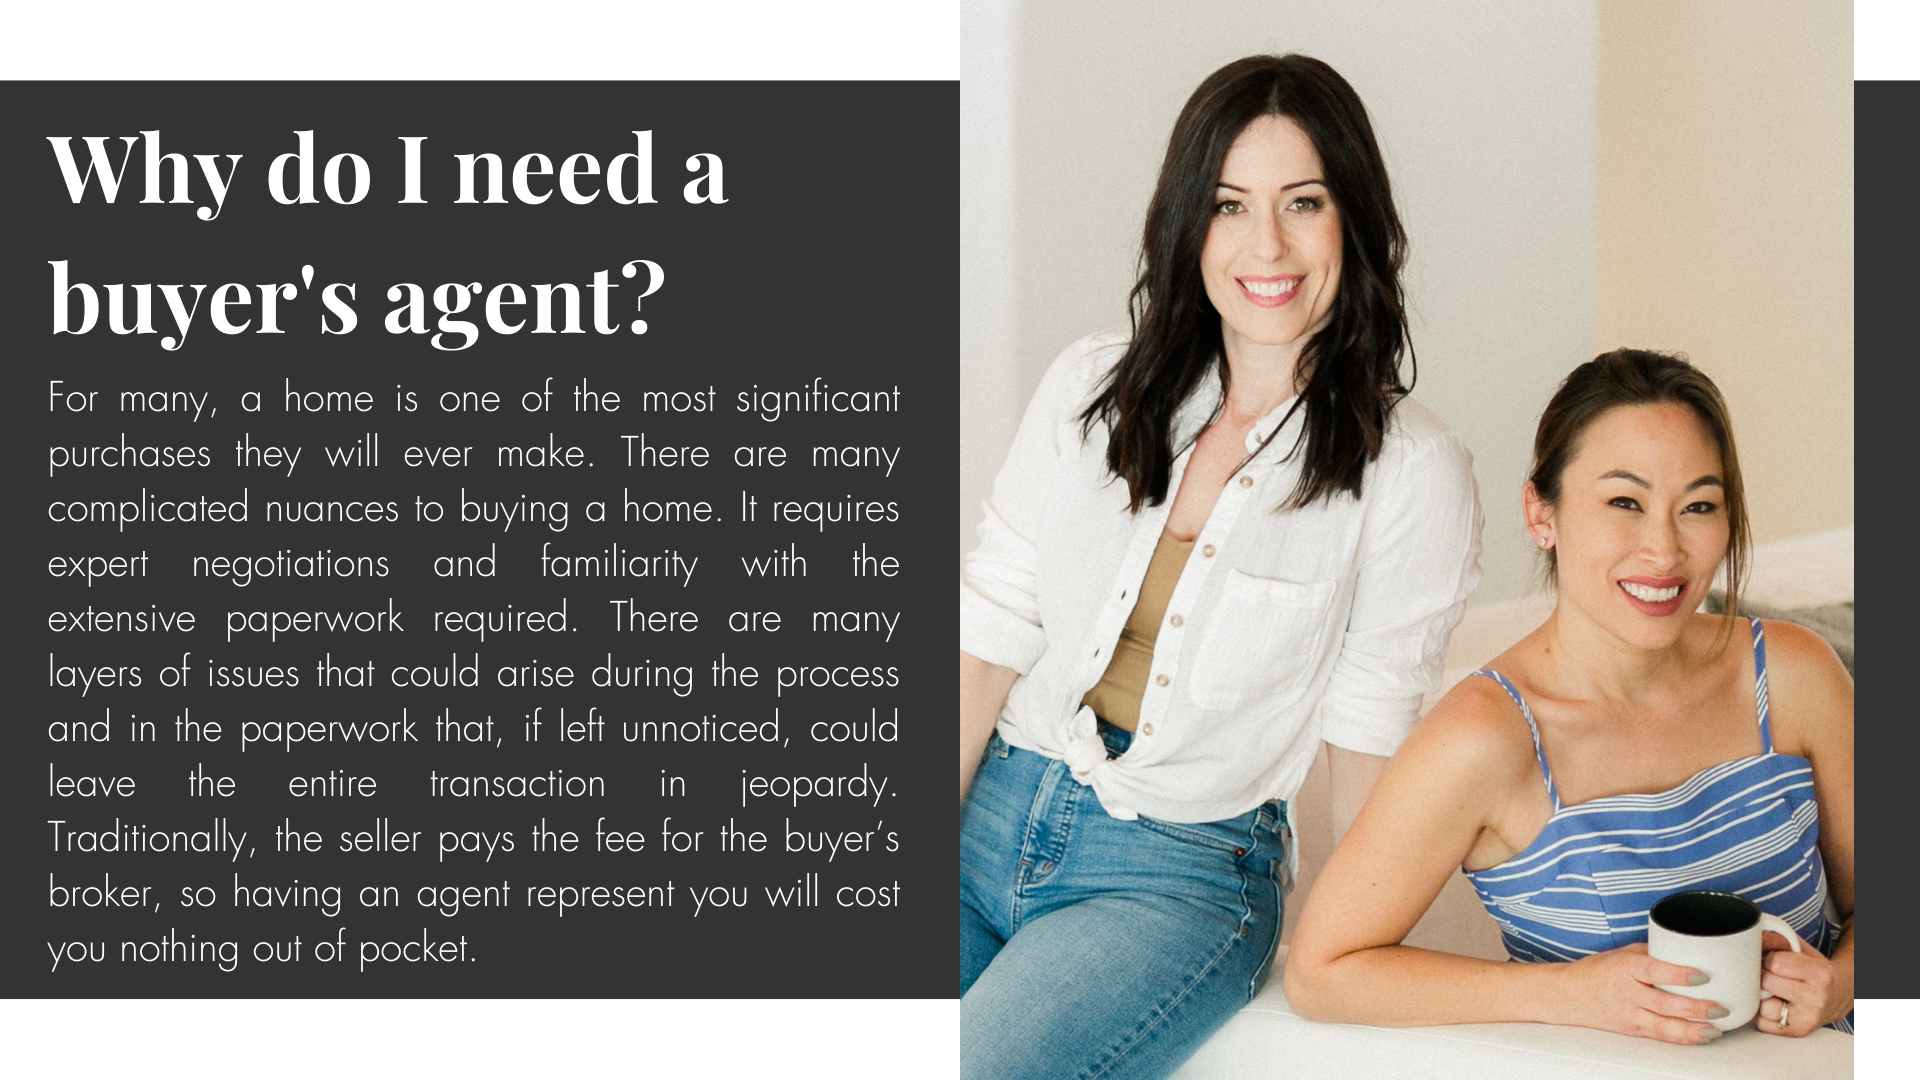 Why do I need a buyer's agent?